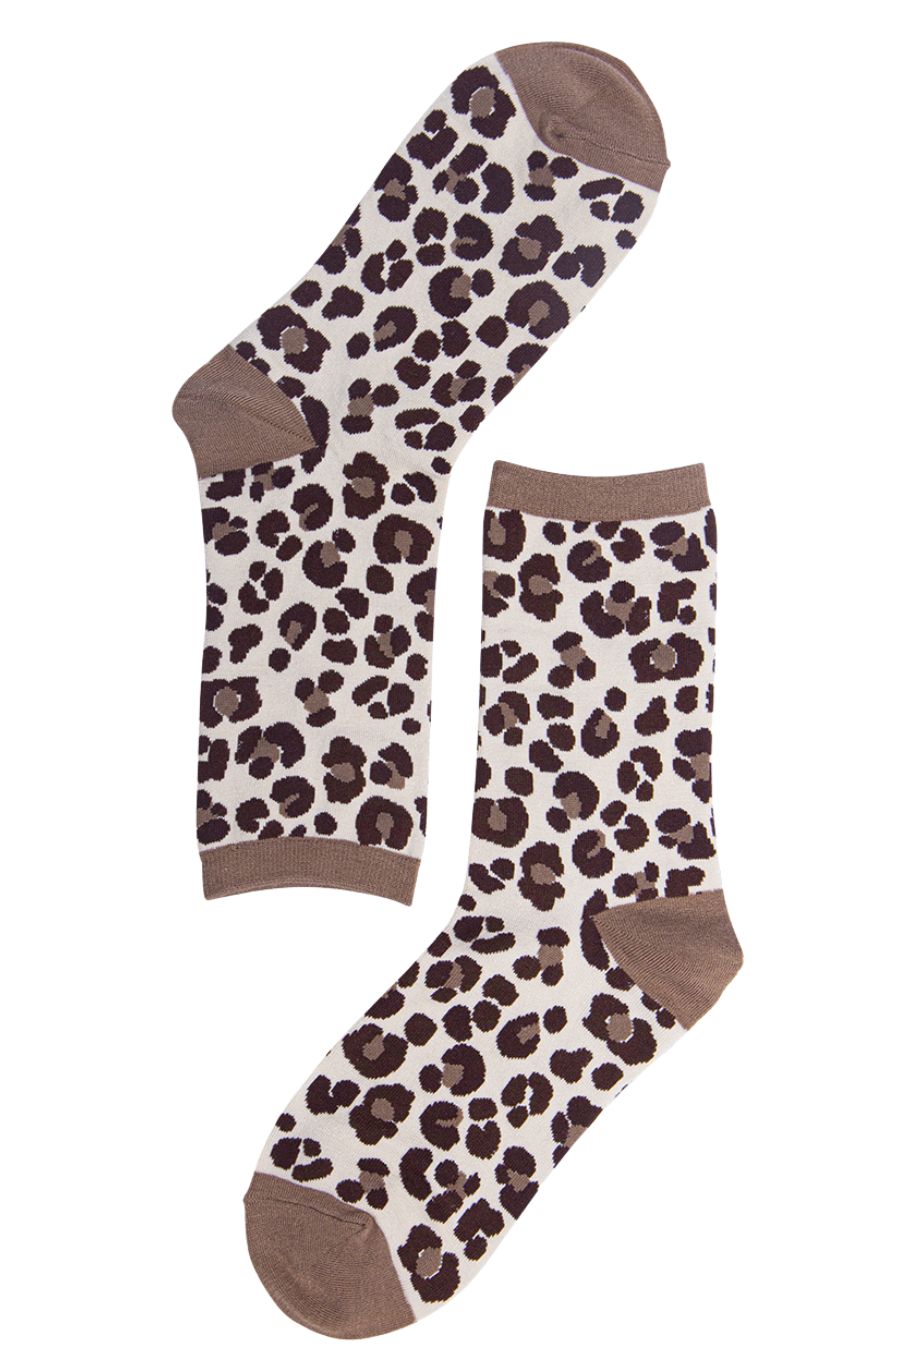 brown, beige ankle socks with an all over leopard print